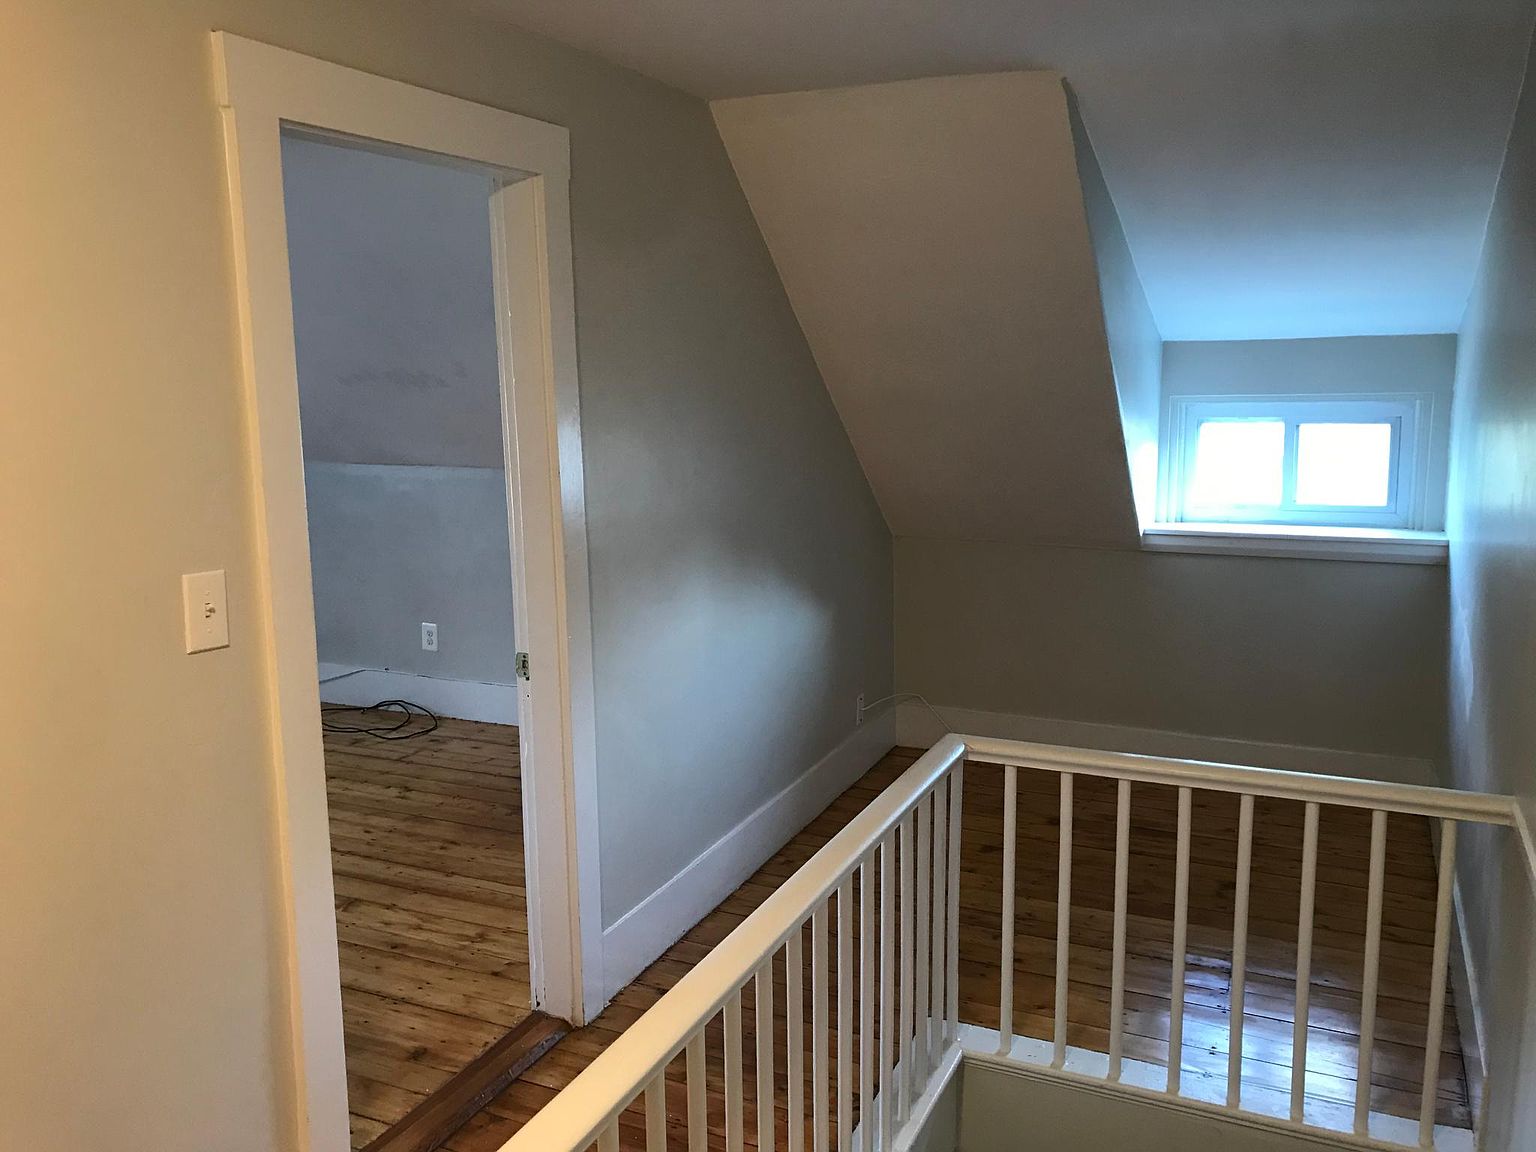 61 Chestnut St Wakefield Ma 01880 Apartments For Rent Zillow